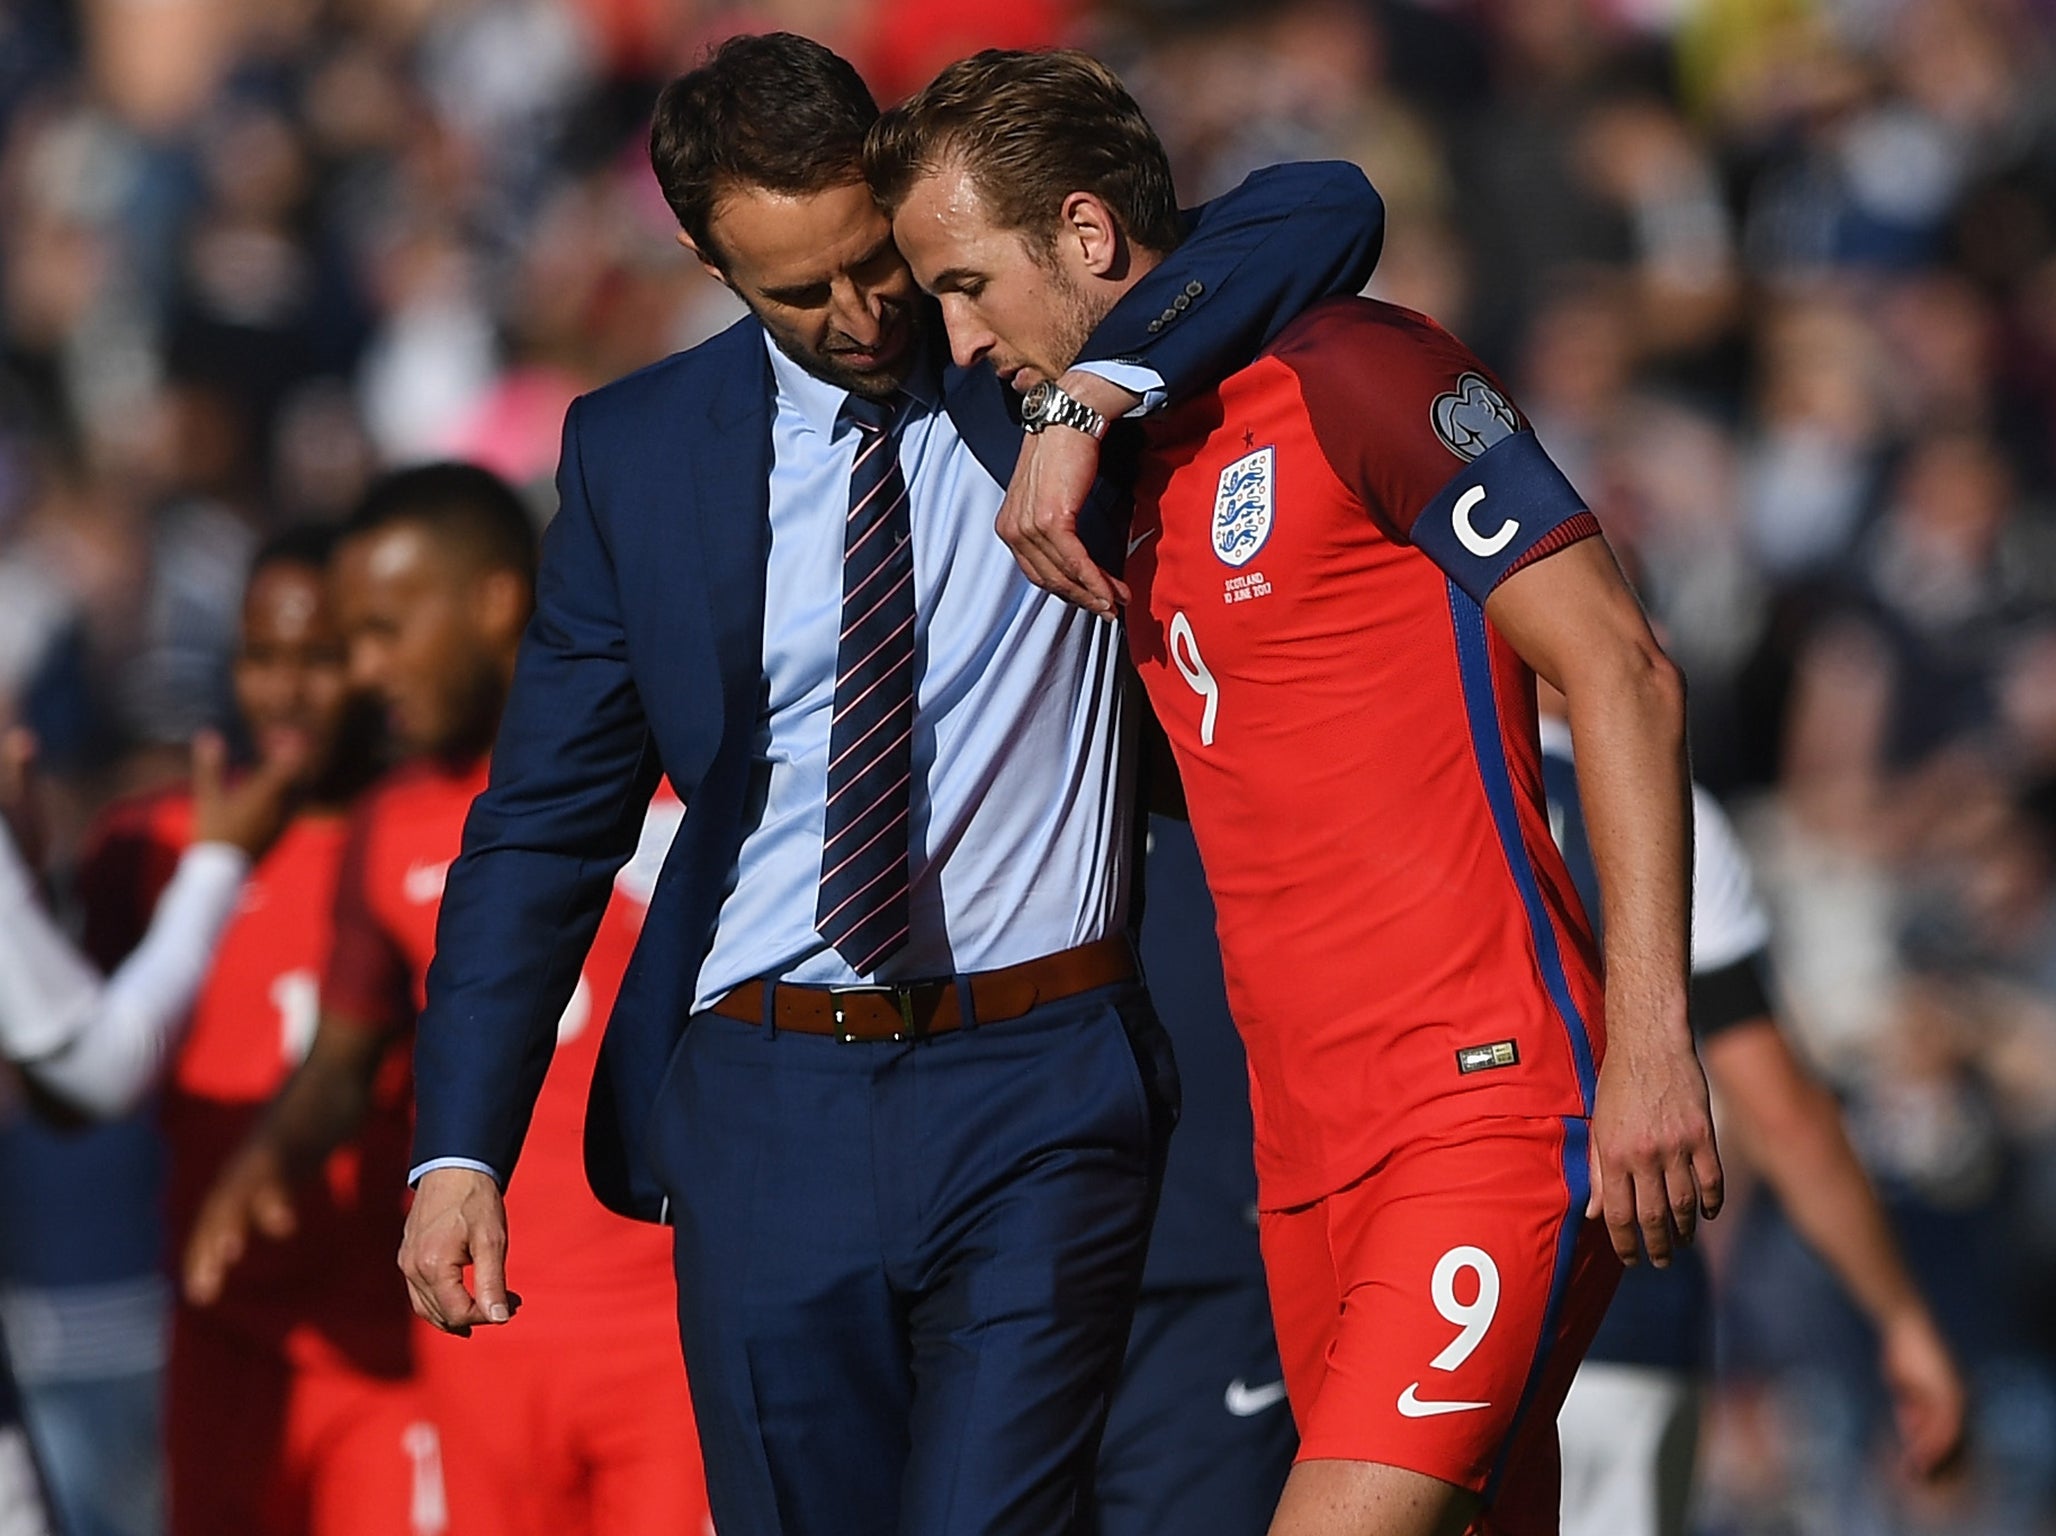 Southgate's side are yet to lose a match in Group F